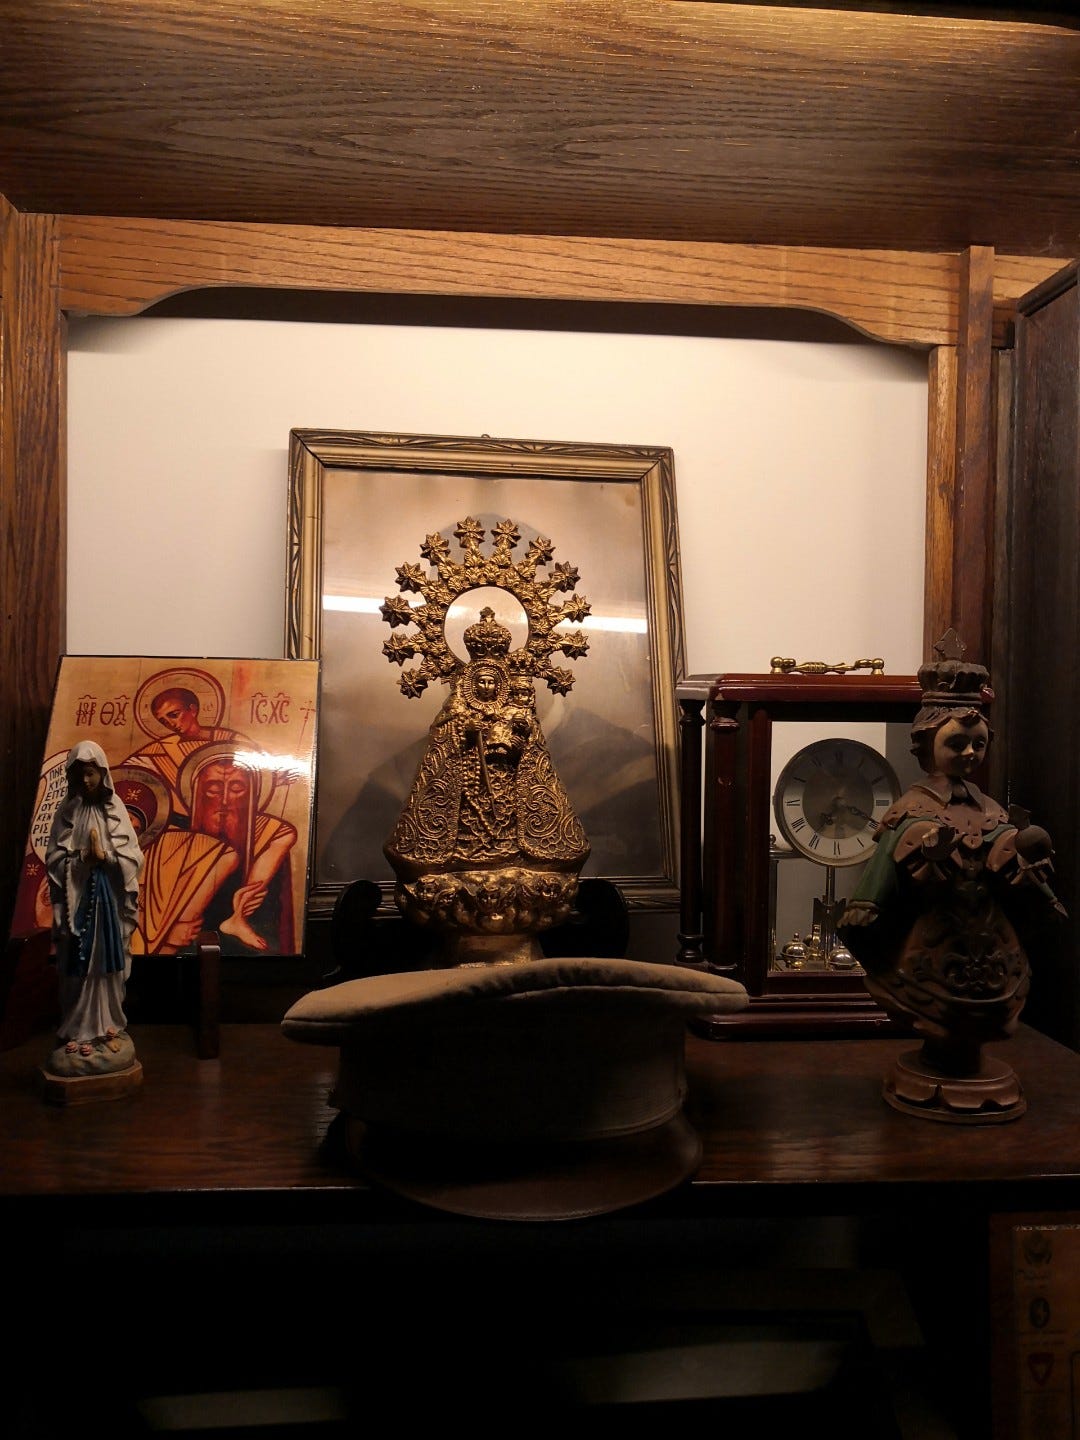 A picture of religious imagery, an antique clock, and an officer's cap.